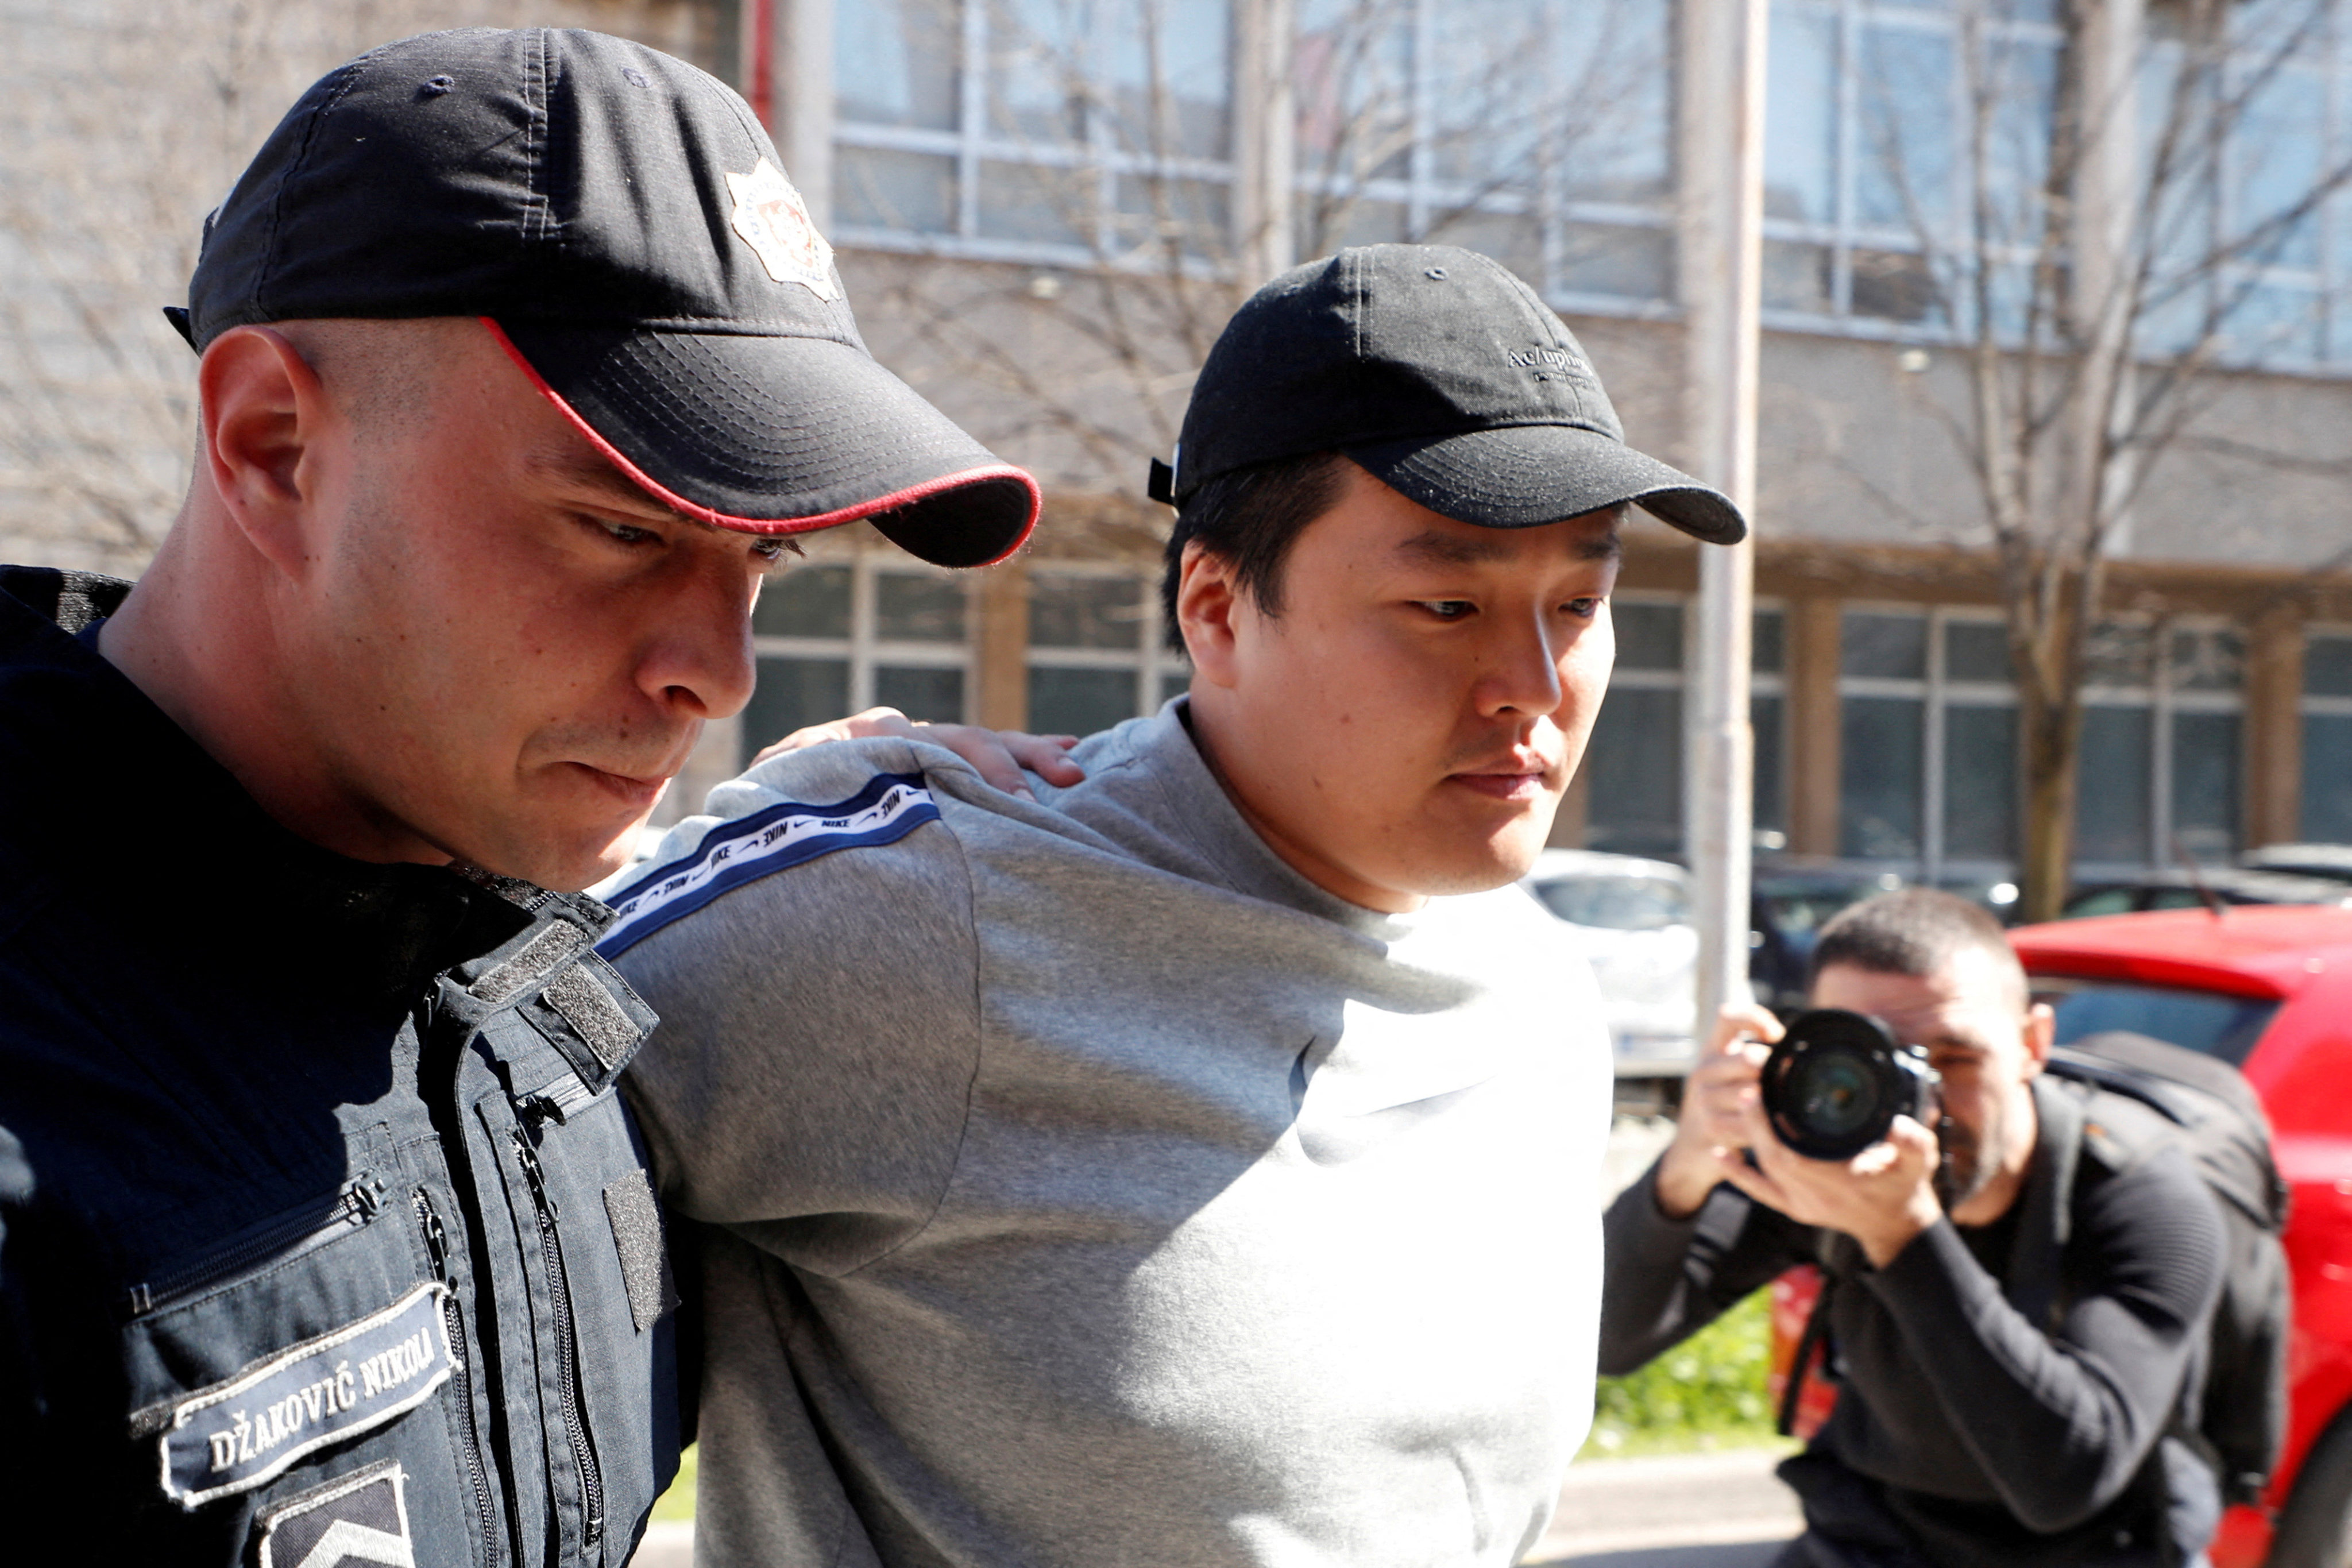 Do Kwon, the South Korean cryptocurrency entrepreneur who created the failed Terra stablecoin, being taken to court in Montenegro in March. Photo: Reuters